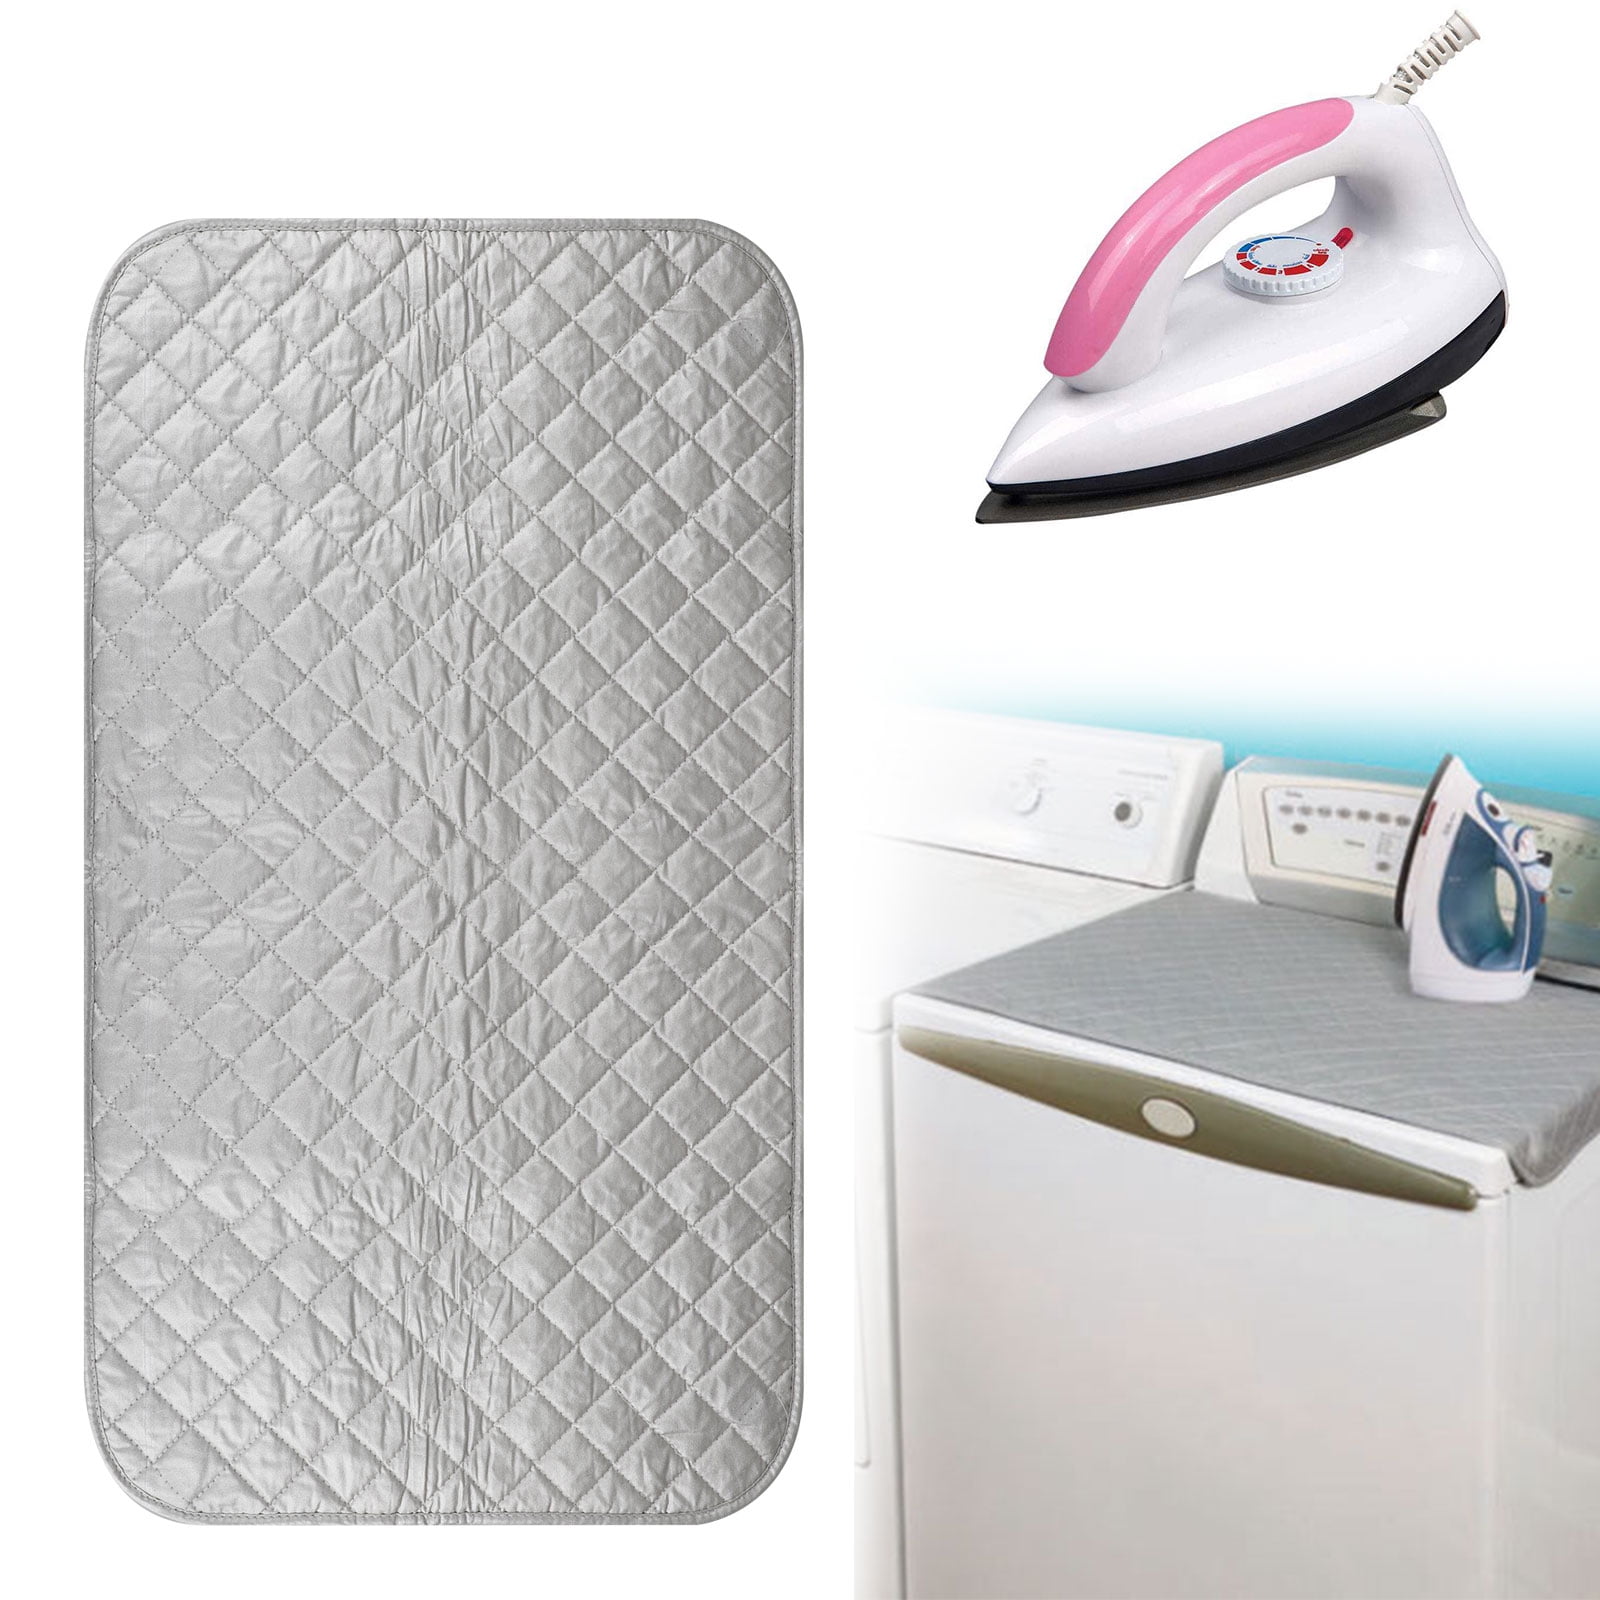 Roning Blanket Ironing Mat,Upgraded Thick Portable Travel Ironing Pad,Isolate  Heat Pad Cover for Washer